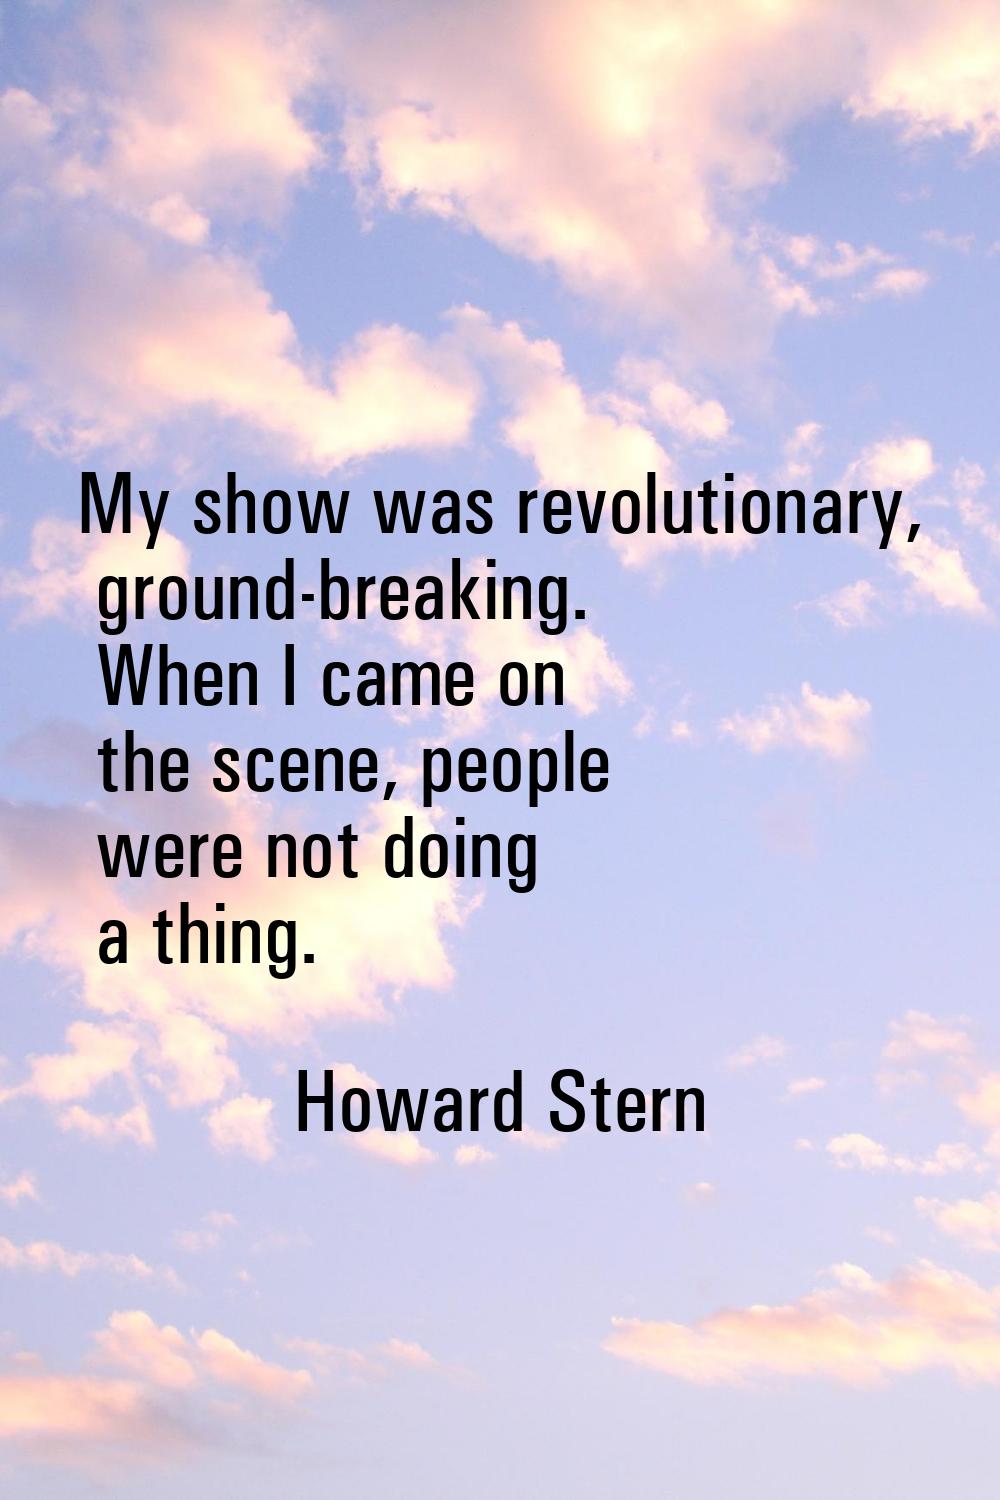 My show was revolutionary, ground-breaking. When I came on the scene, people were not doing a thing